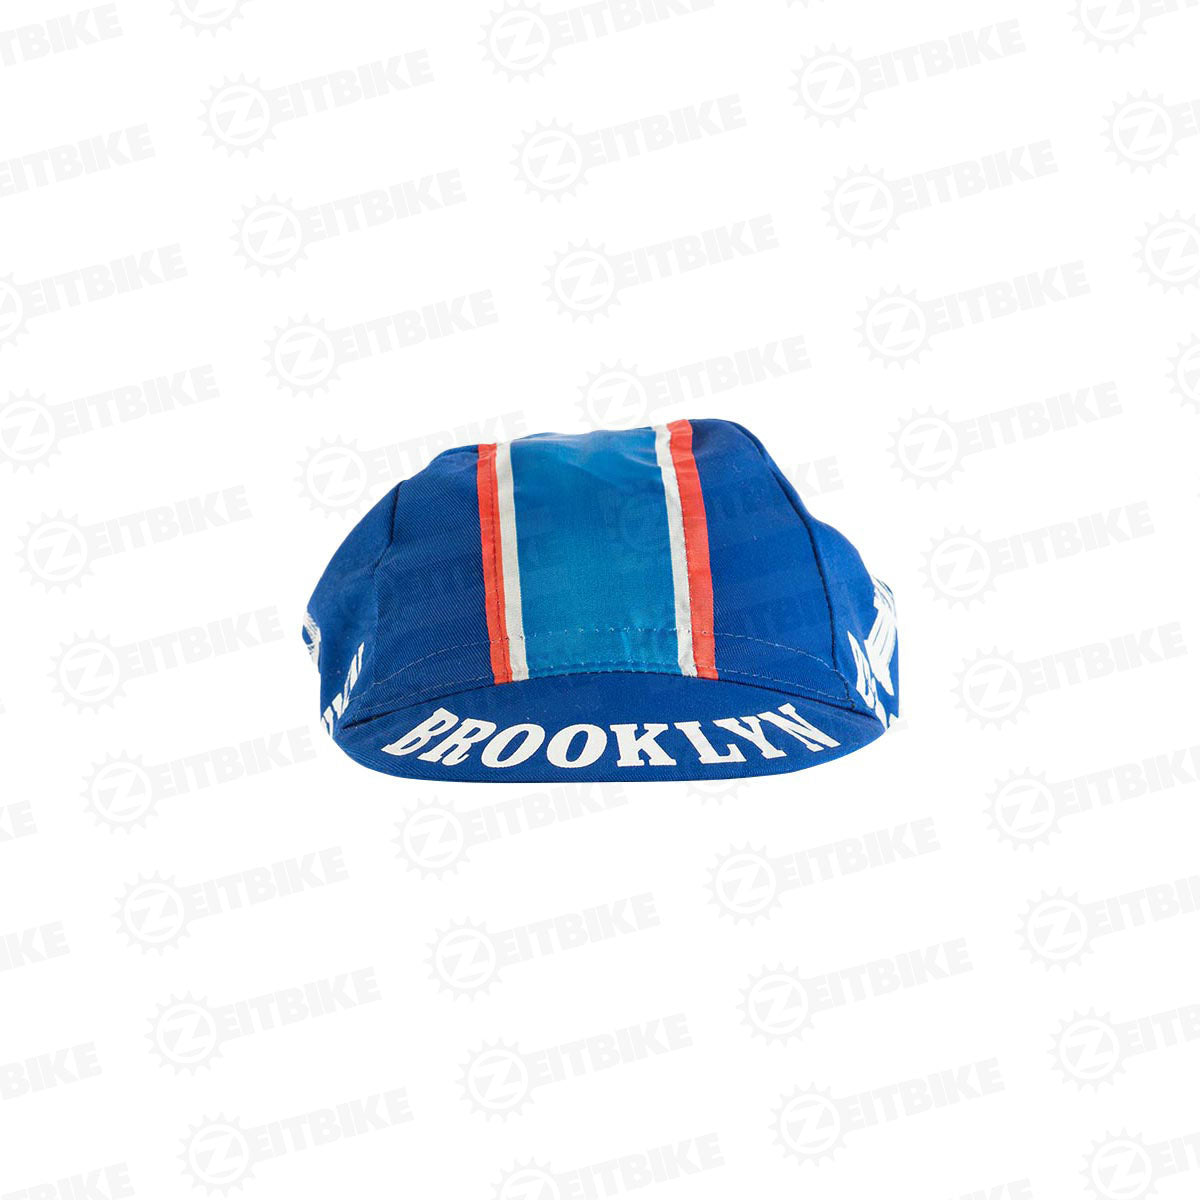 ZEITBIKE - Vintage Cycling Cap - Brooklyn - Blue |  | Anti Sweat Caps | for Stand Alone or Under Helmet | Team Jersey Cap Outdoor Cap